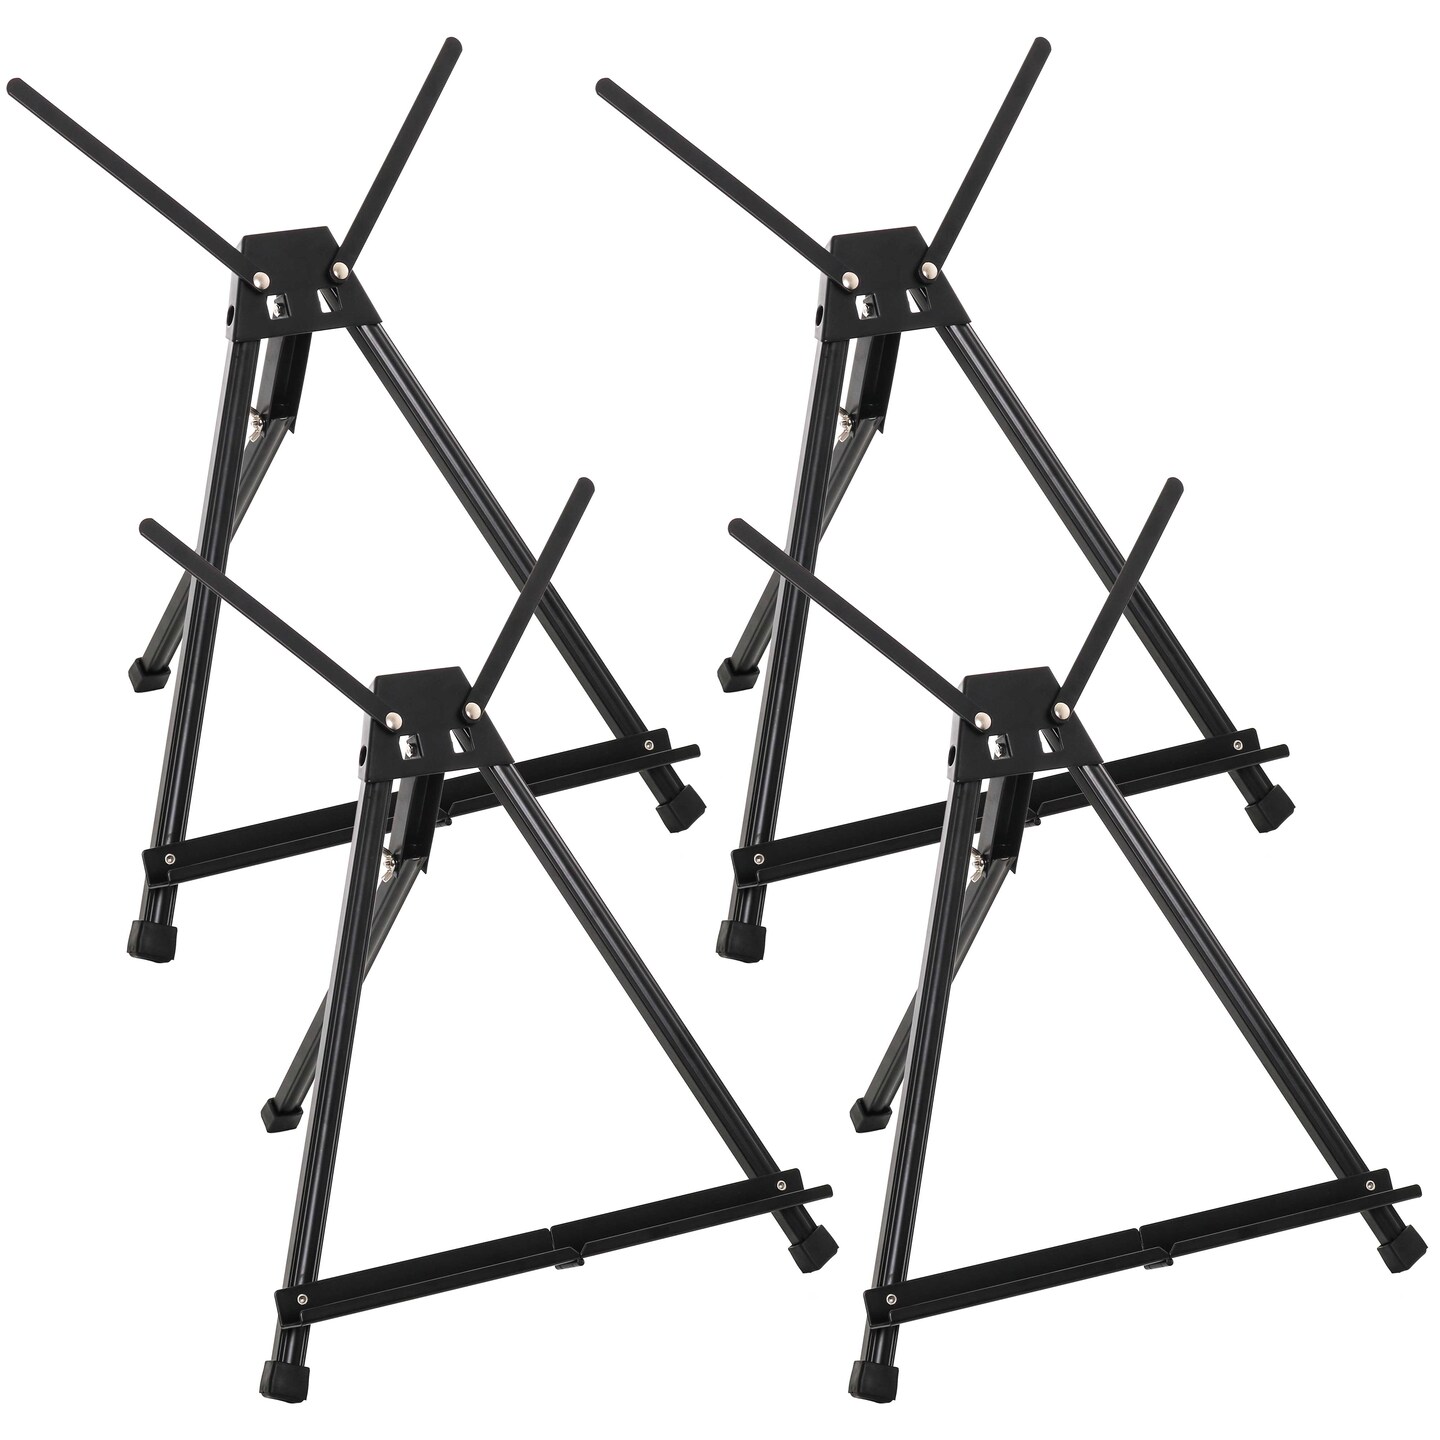 15&#x22; to 21&#x22; High Adjustable Black Aluminum Tabletop Display Easel, 4 Pack - Portable Artist Tripod Stand with Extension Arm Wings, Folding Frame